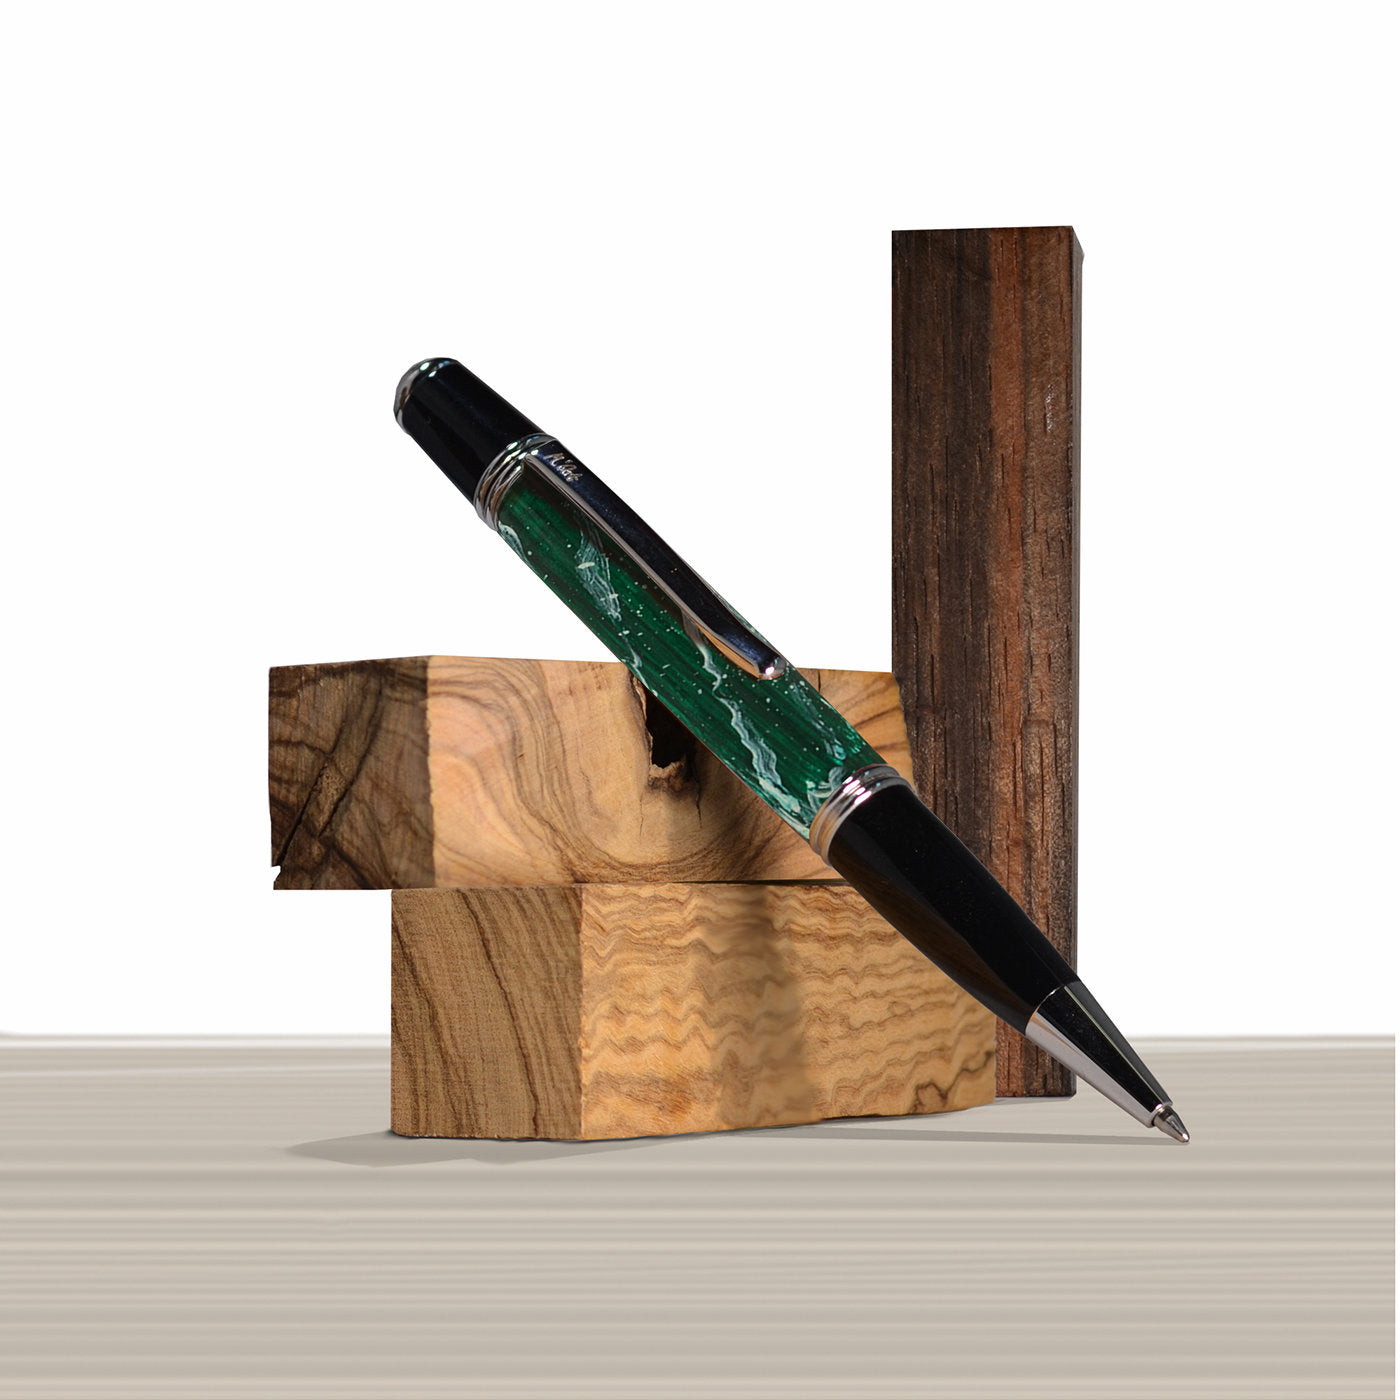 Mantinea Marbled Green Ballpoint Pen in Olive Wood - Alternative view 2